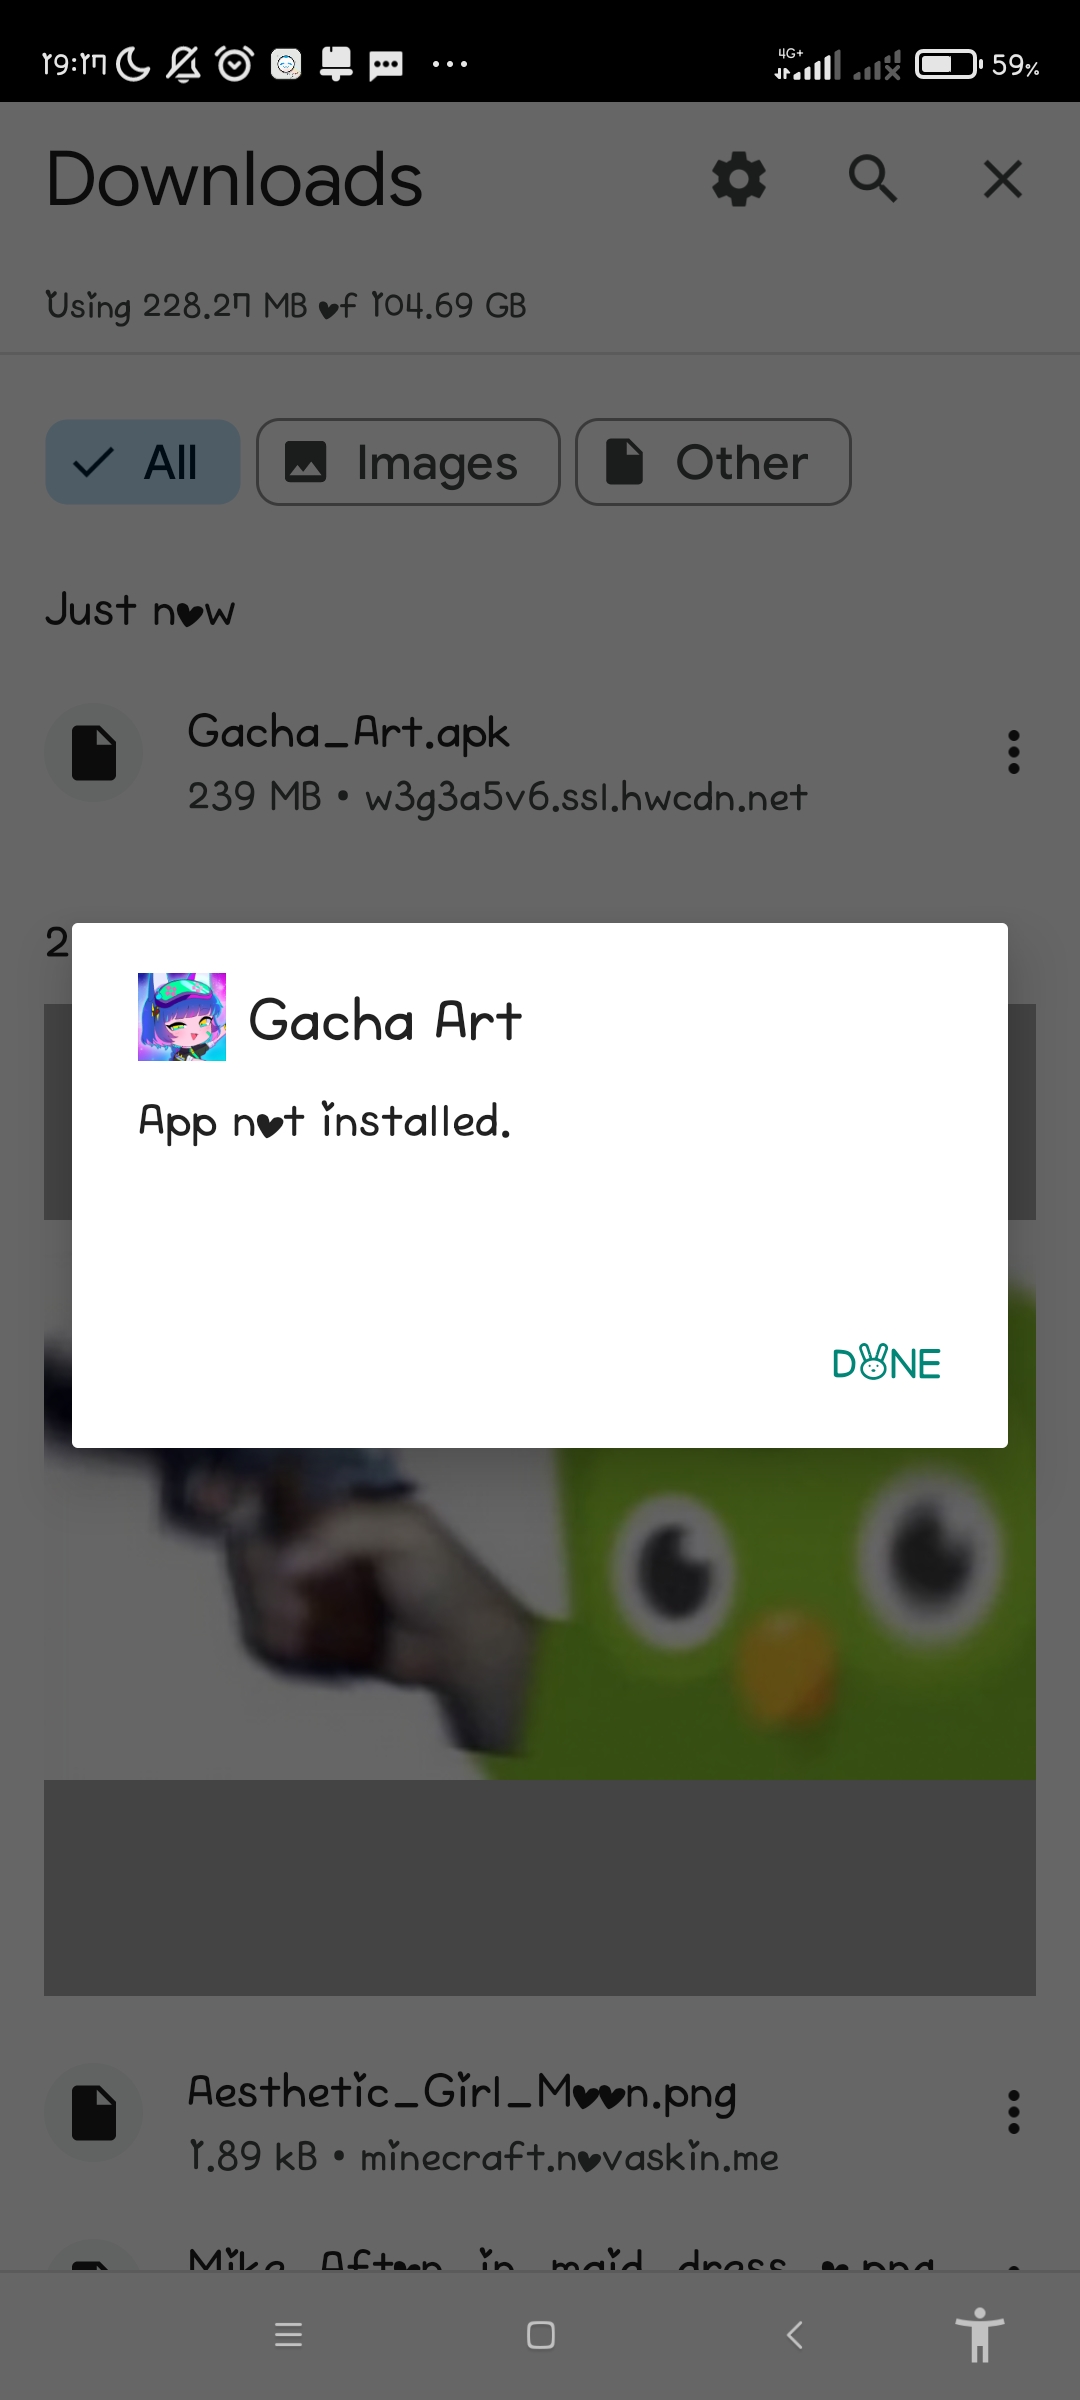 Comments 35 to 1 of 630 - Gacha_Art by bakugou-rima